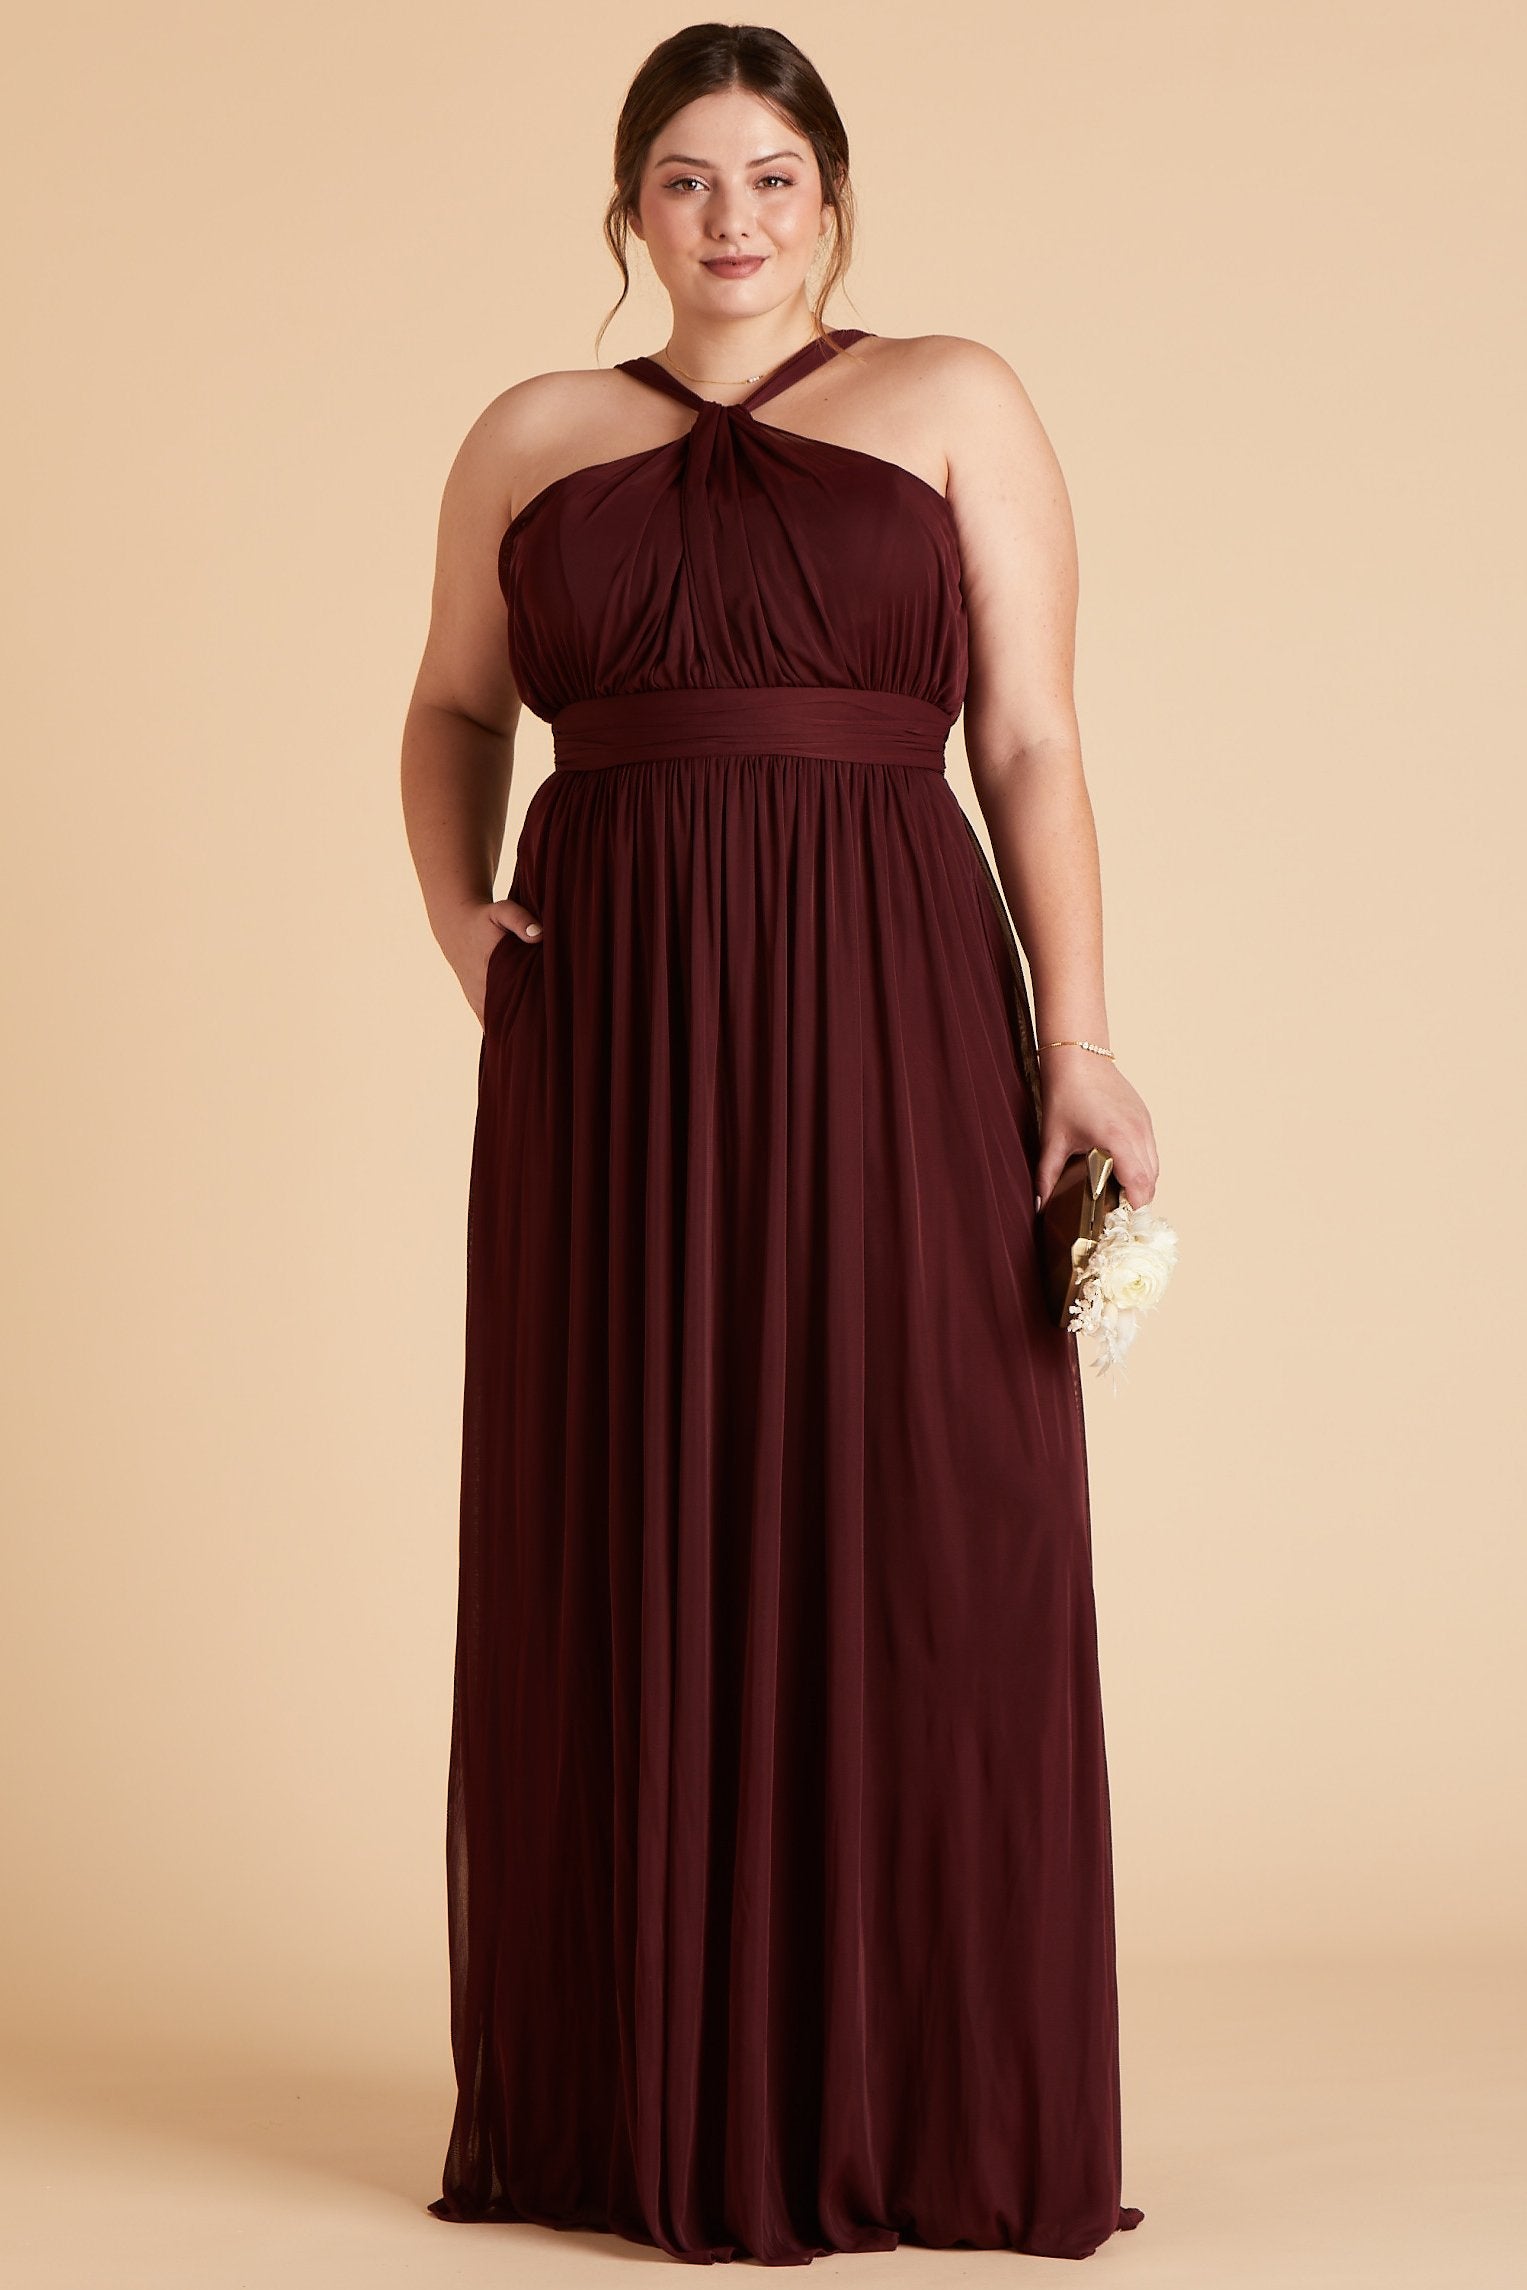 Kiko plus size bridesmaid dress in cabernet burgundy chiffon by Birdy Grey, front view with hand in pocket